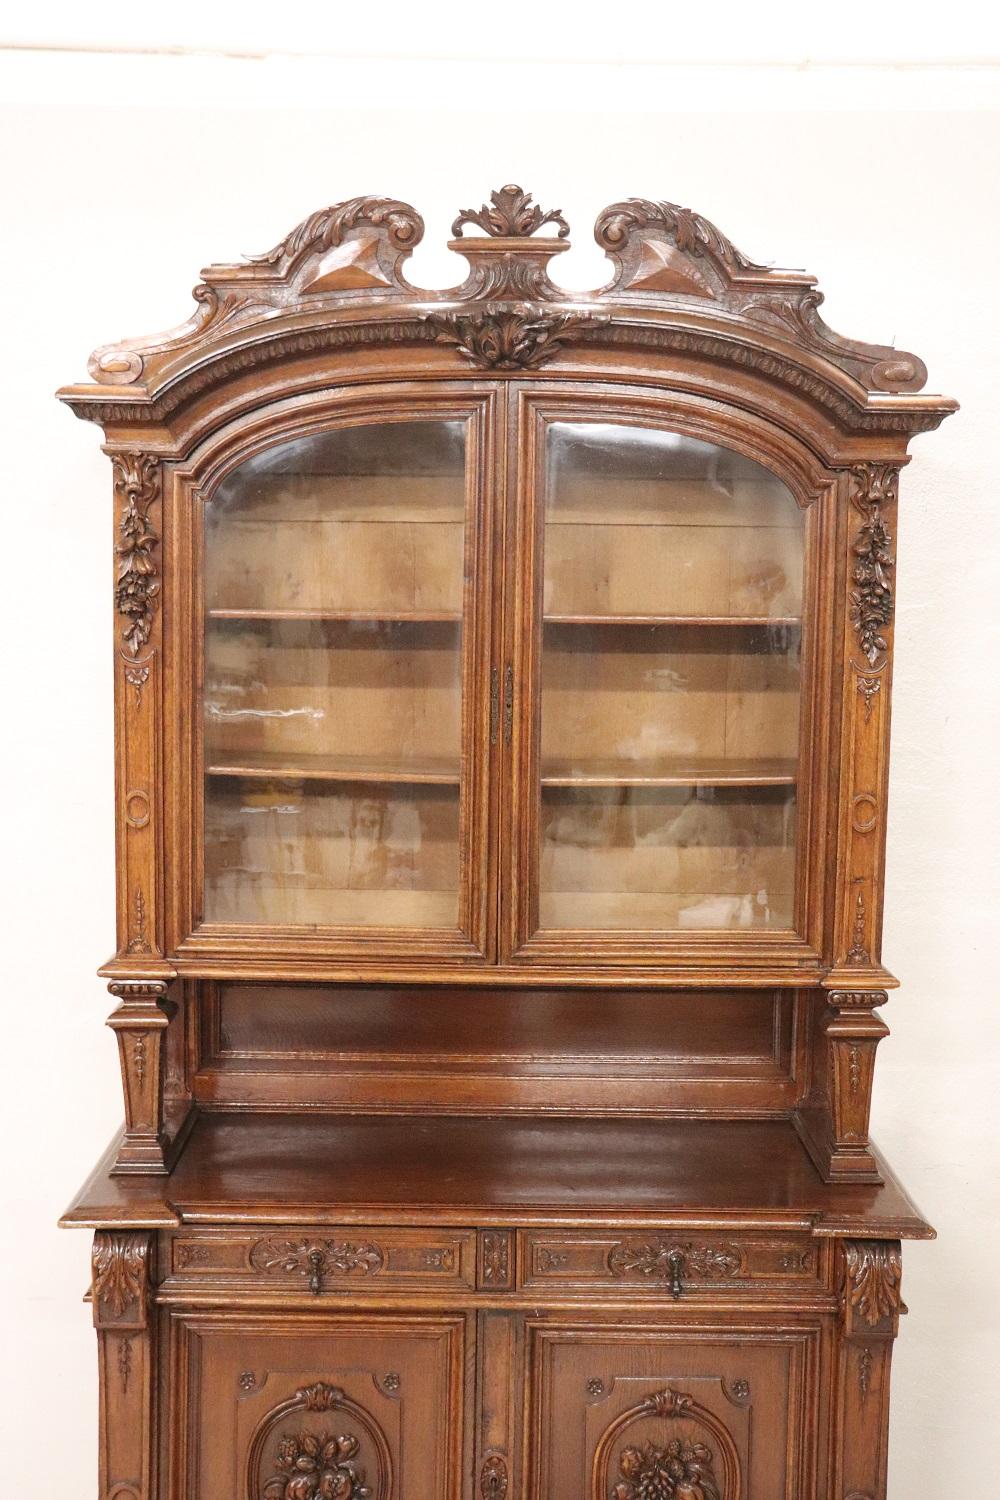 Hand-Carved 19th Century Italian Carved Oak Wood Majestic Antique Sideboard, 1850s For Sale